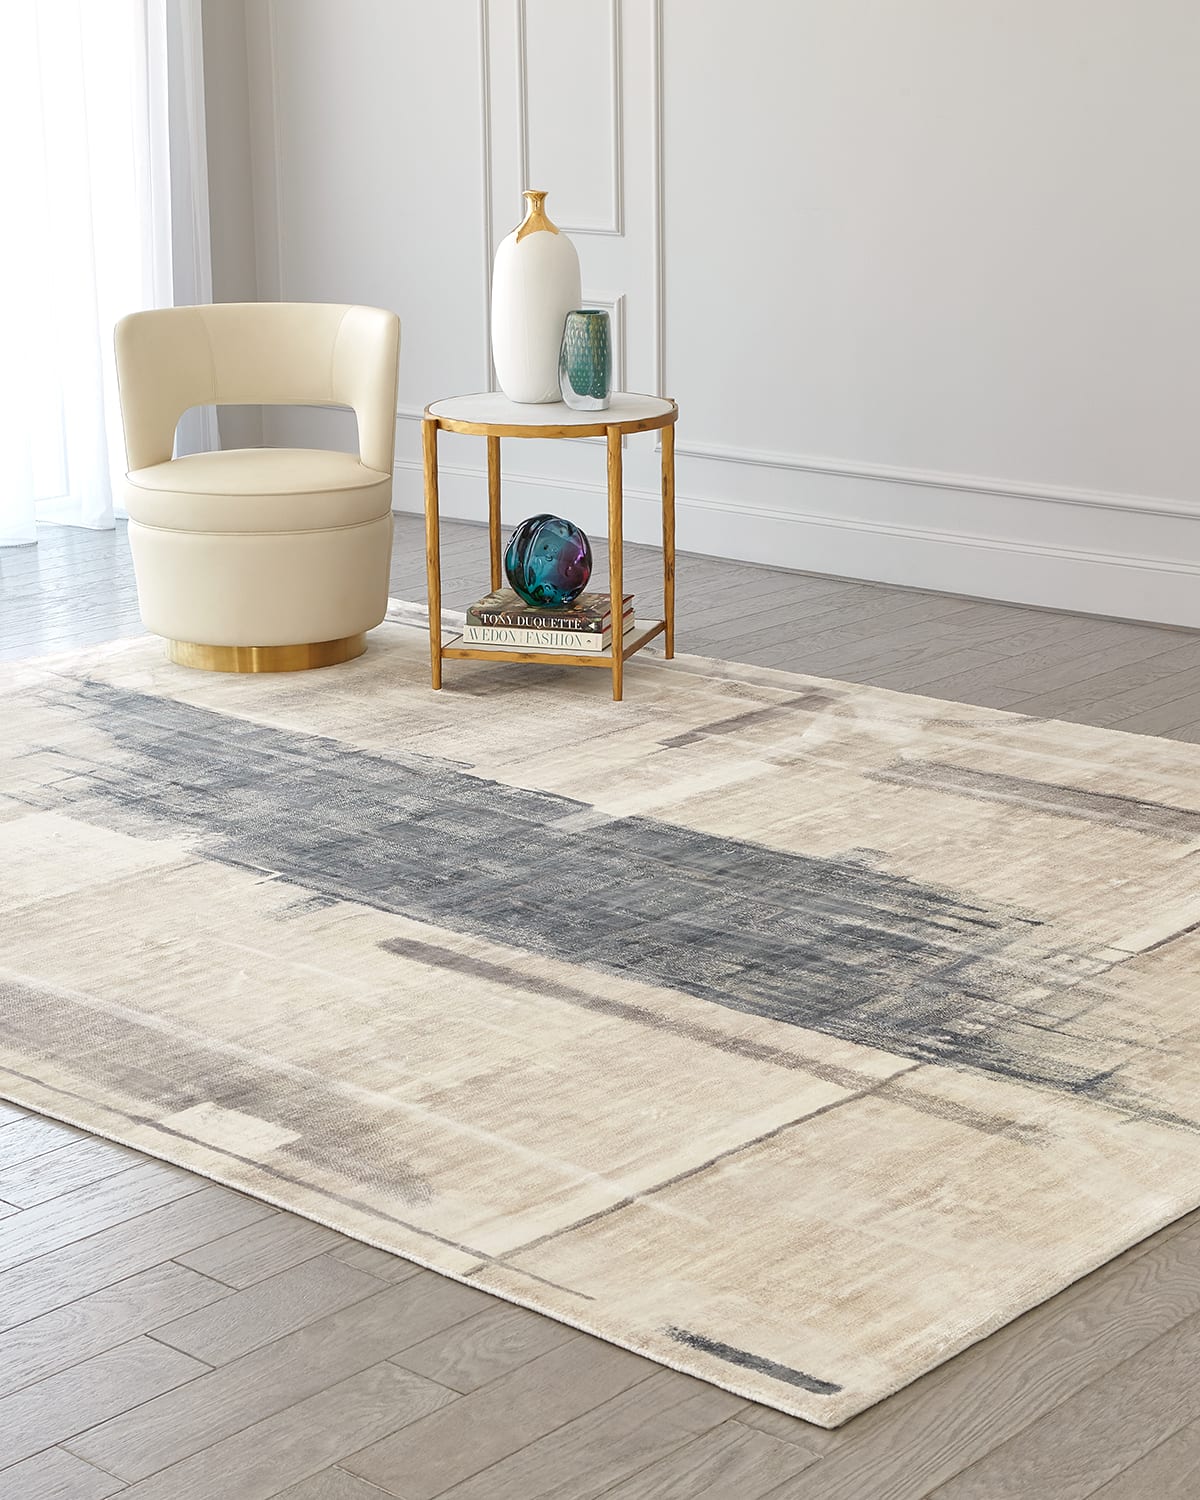 George Sellers For Global Views Art Hand-woven Rug, 6' X 9' In Gray